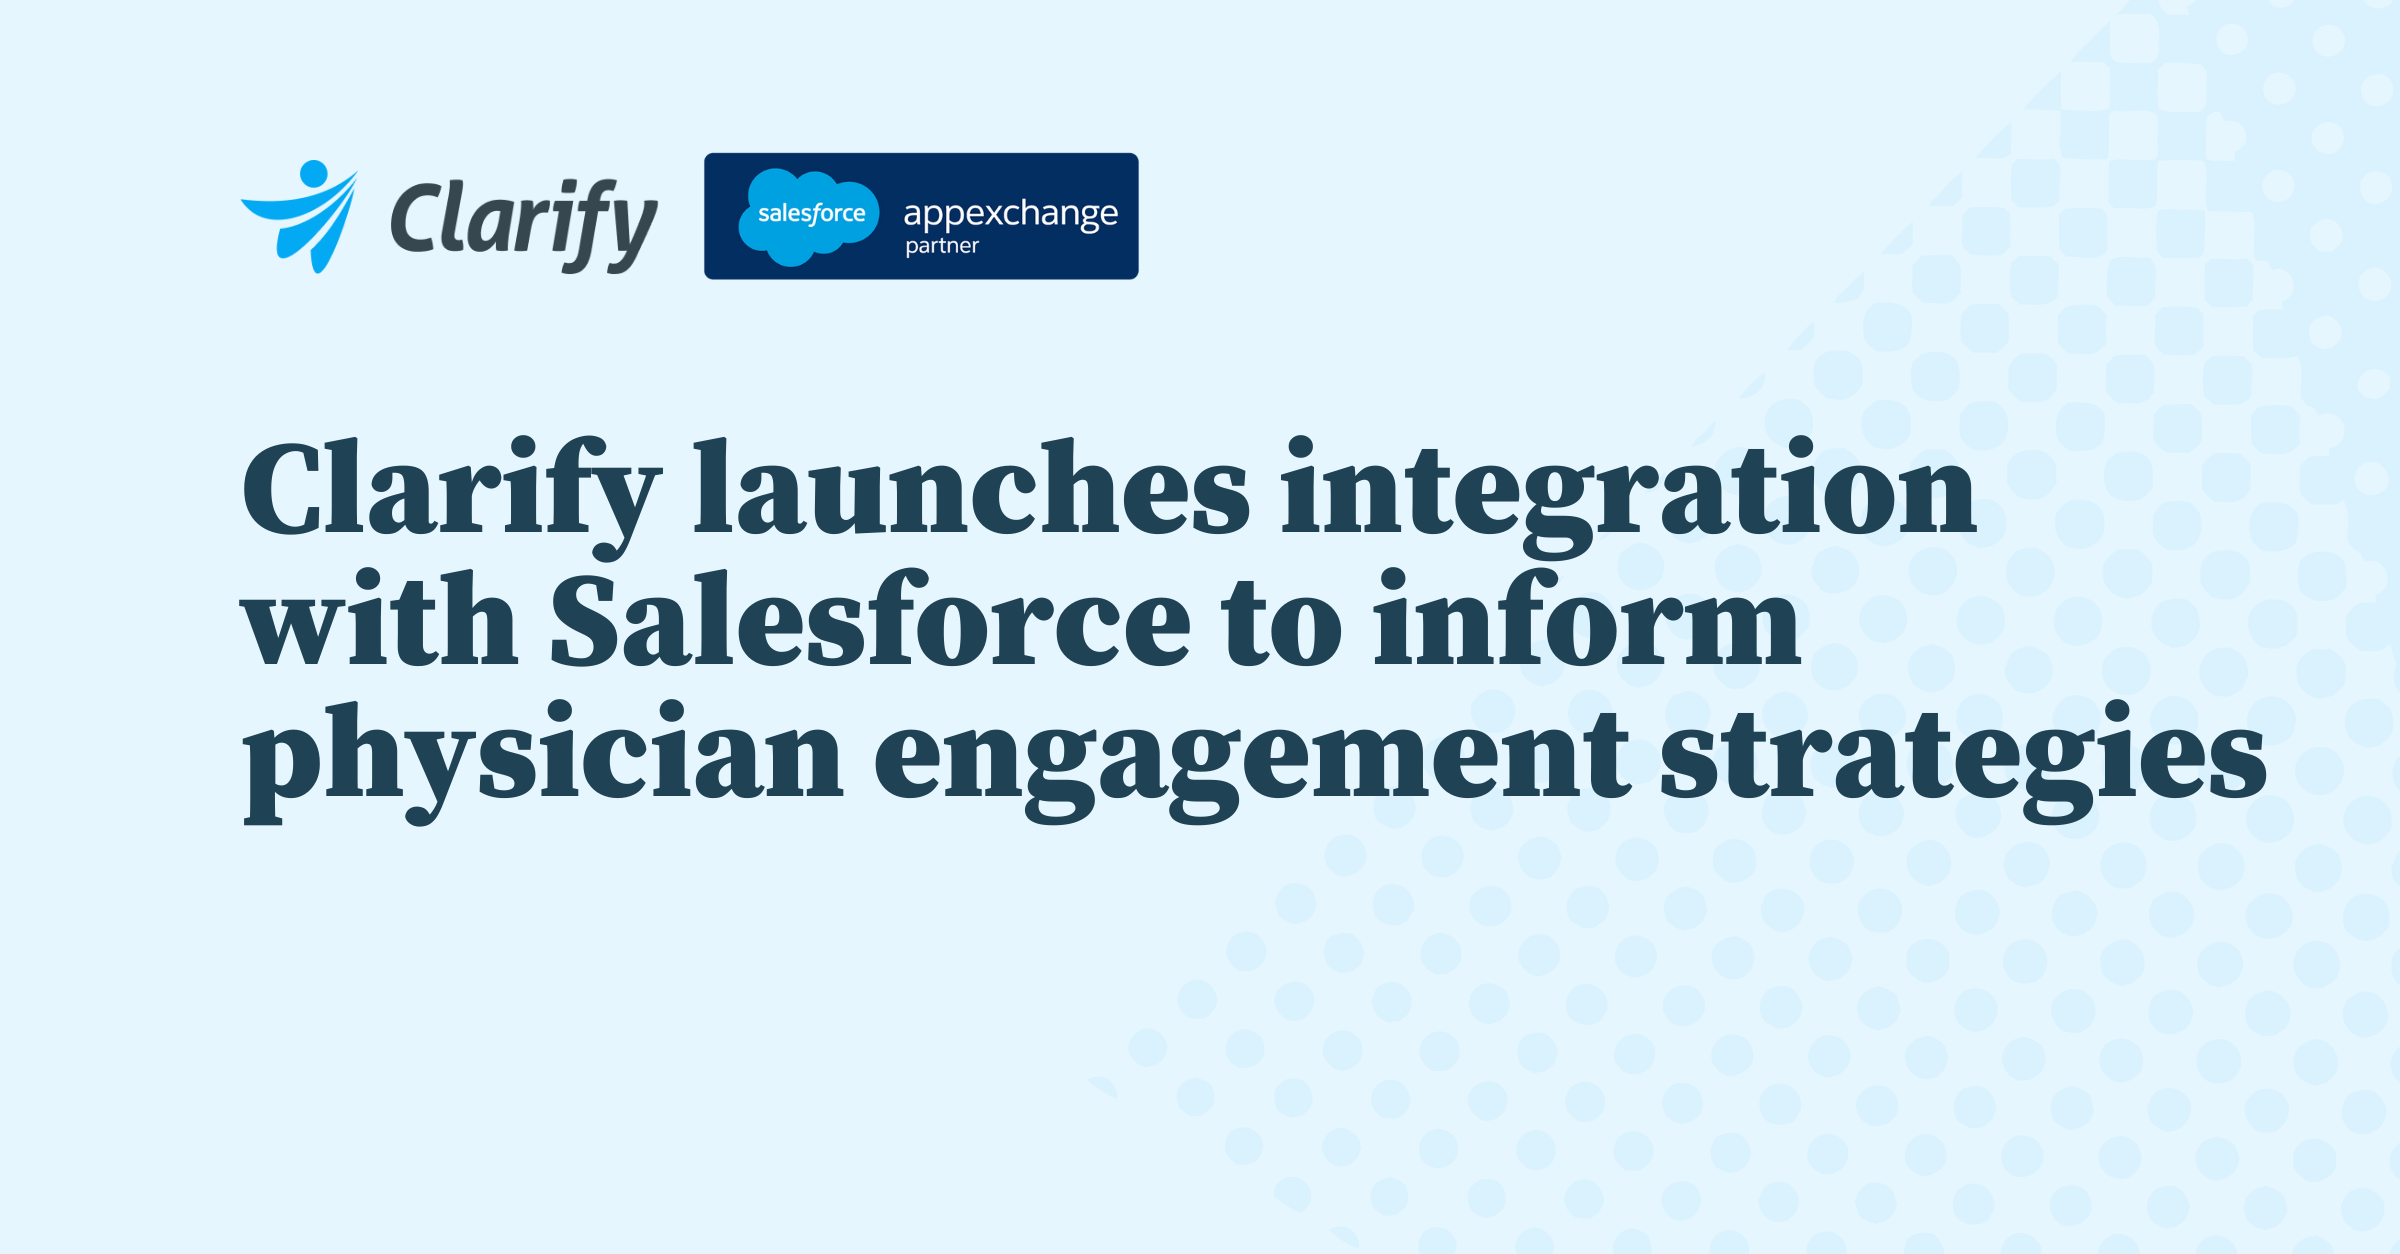 Thumbnail for Clarify launches integration with Salesforce to inform physician engagement strategies with precise, on-demand insights into physician referral patterns